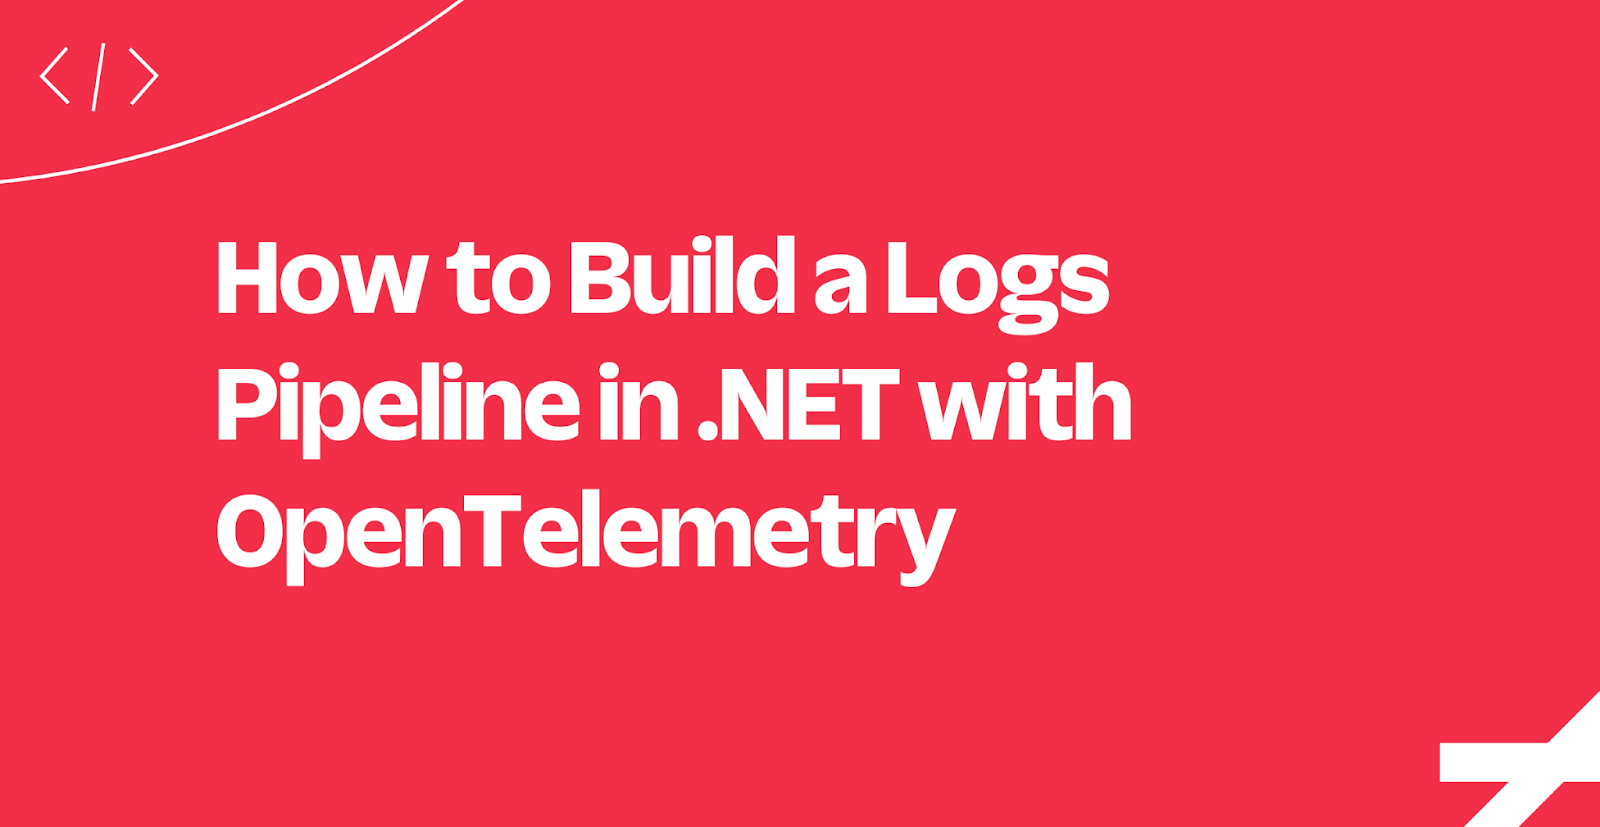 How to Build a Logs Pipeline in .NET with OpenTelemetry